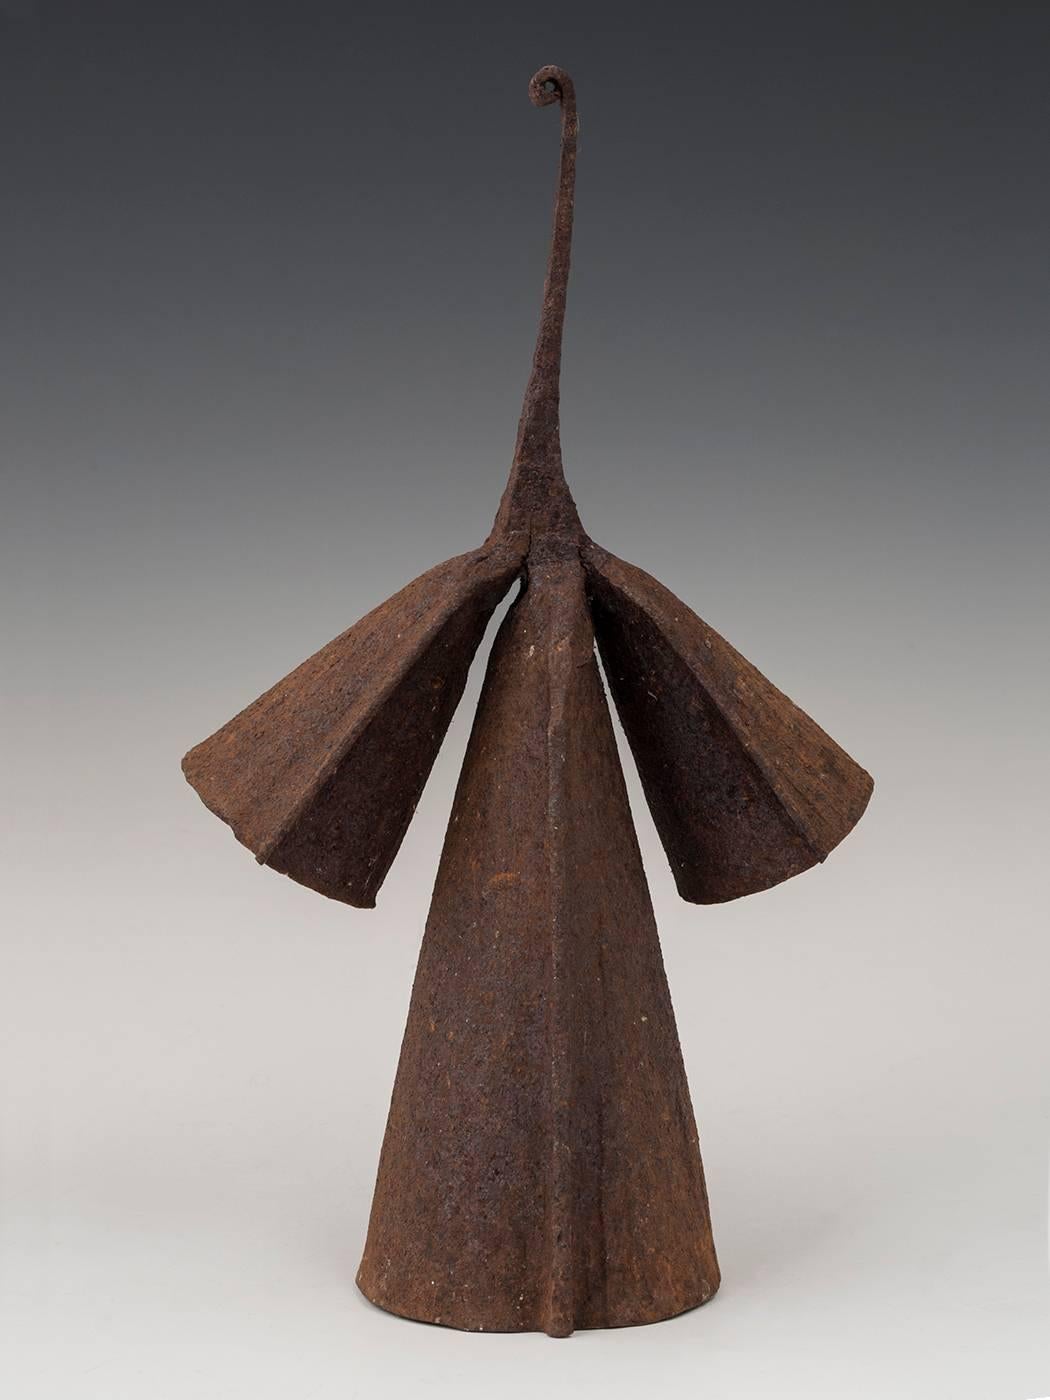 Early 20th Century Tribal Iron Gong Currency, Yoruba People, Nigeria, Africa

This very graceful anthropomorphic gong currency has two different pitches when struck.
 